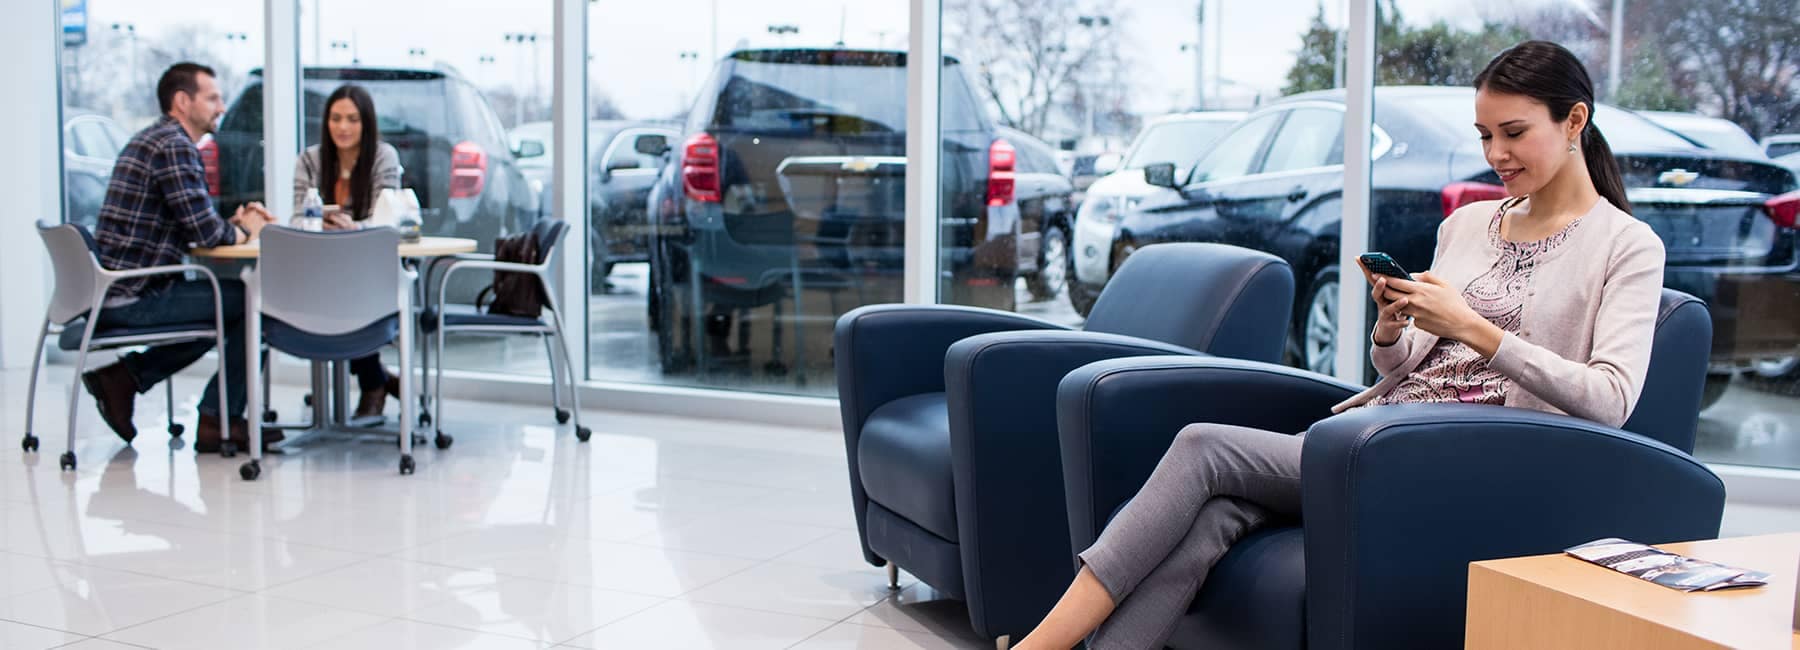 Chevrolet customers sitting in a showroom